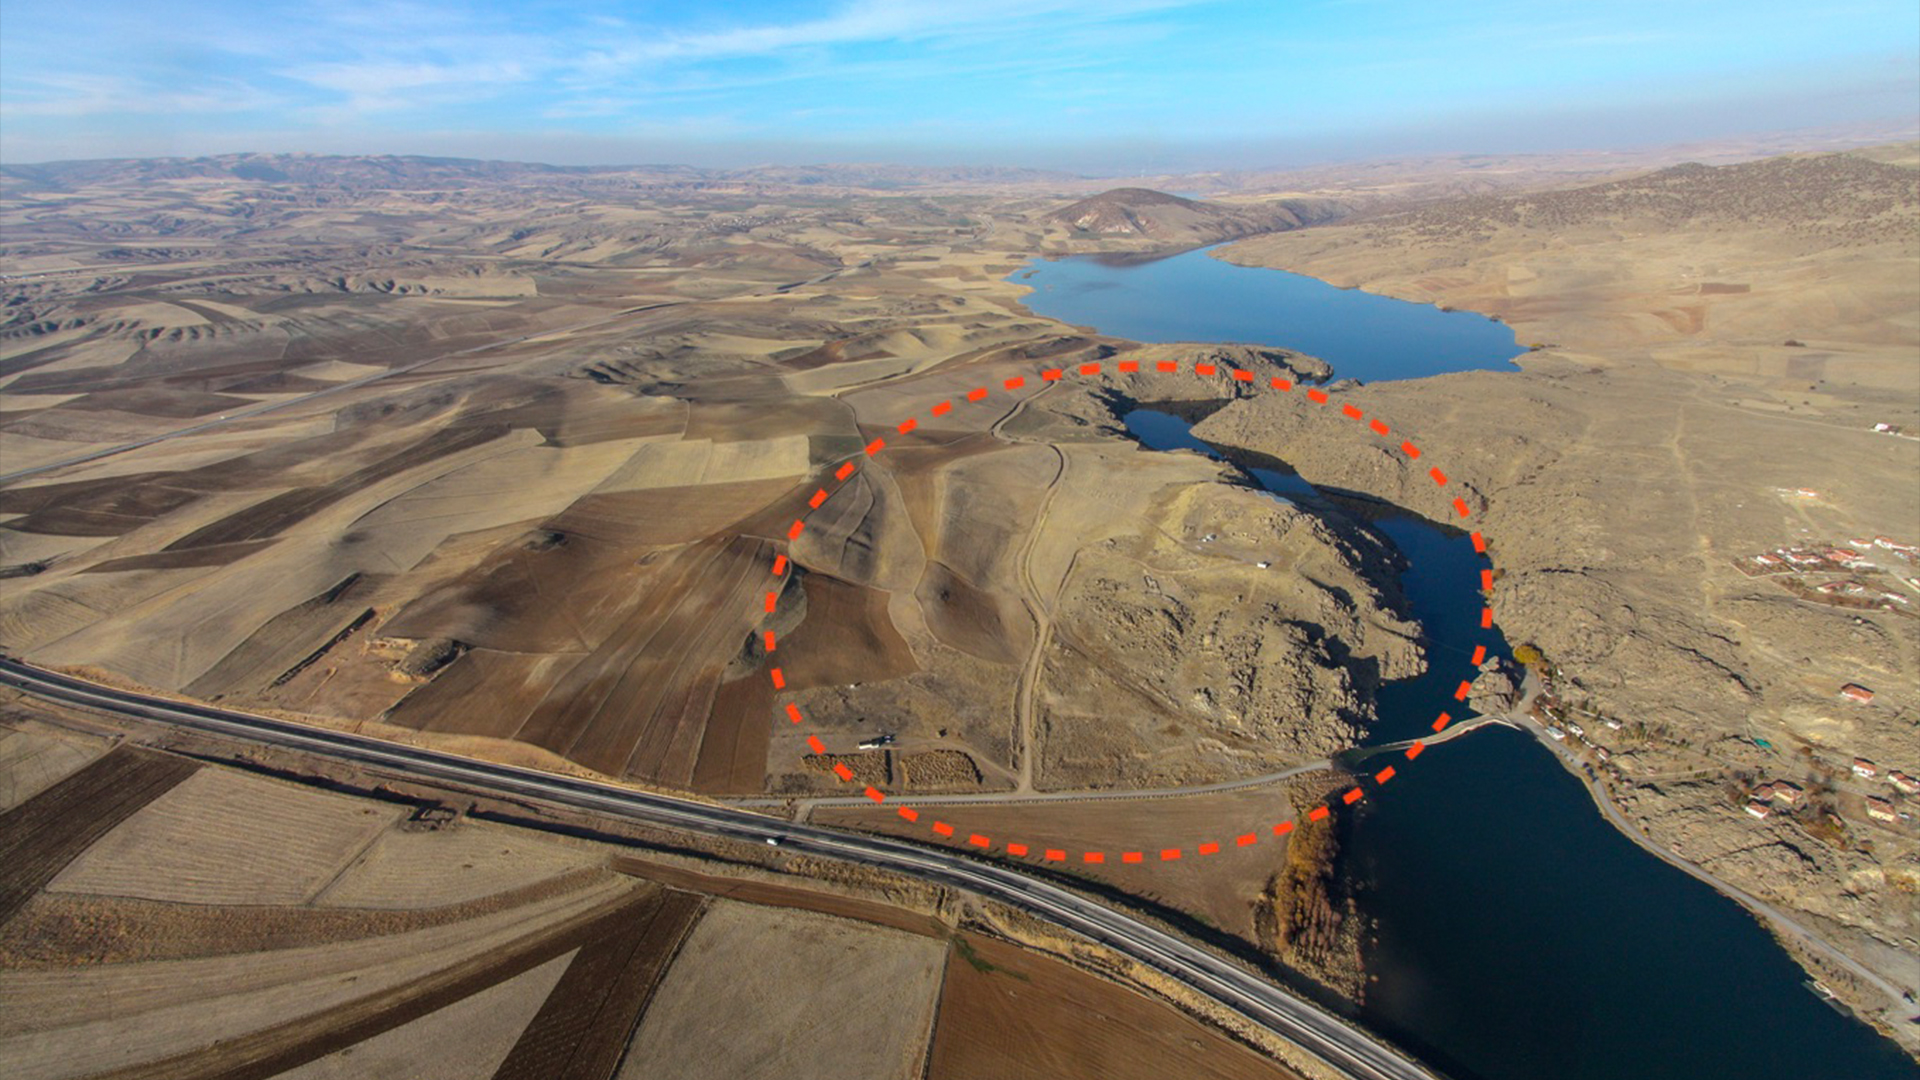 Archaeological site of Büklükale in central Turkey, surrounded by dry land with a long highway and large lake under blue sky.